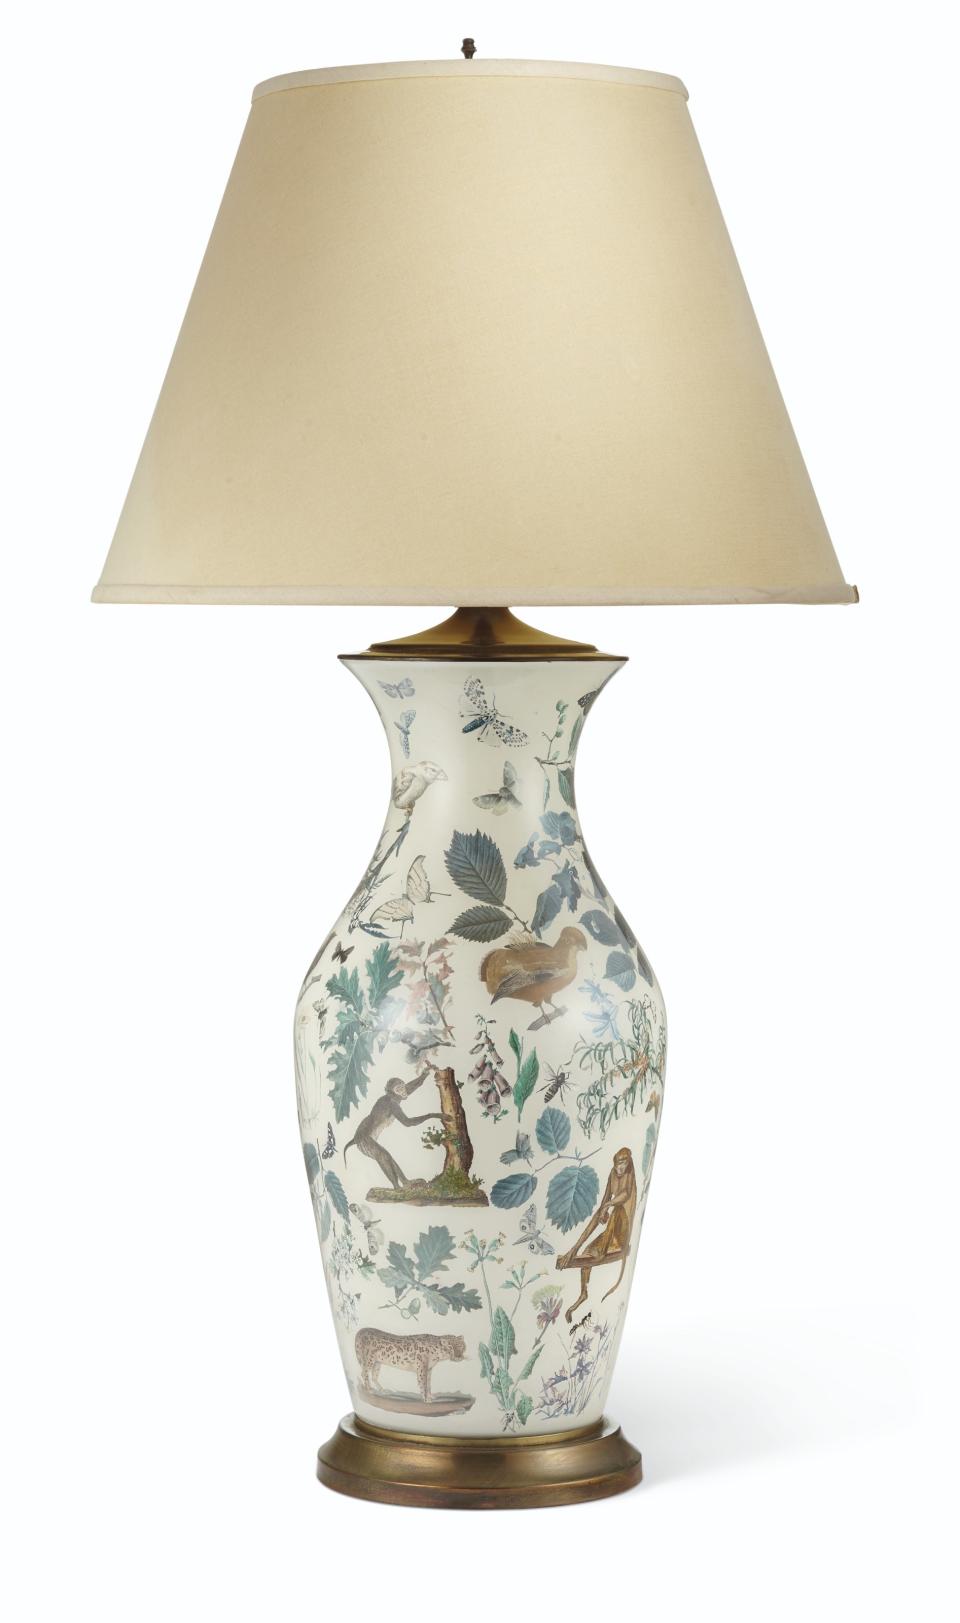 A 20th-century Decalcomania Baluster vase mounted as a lamp